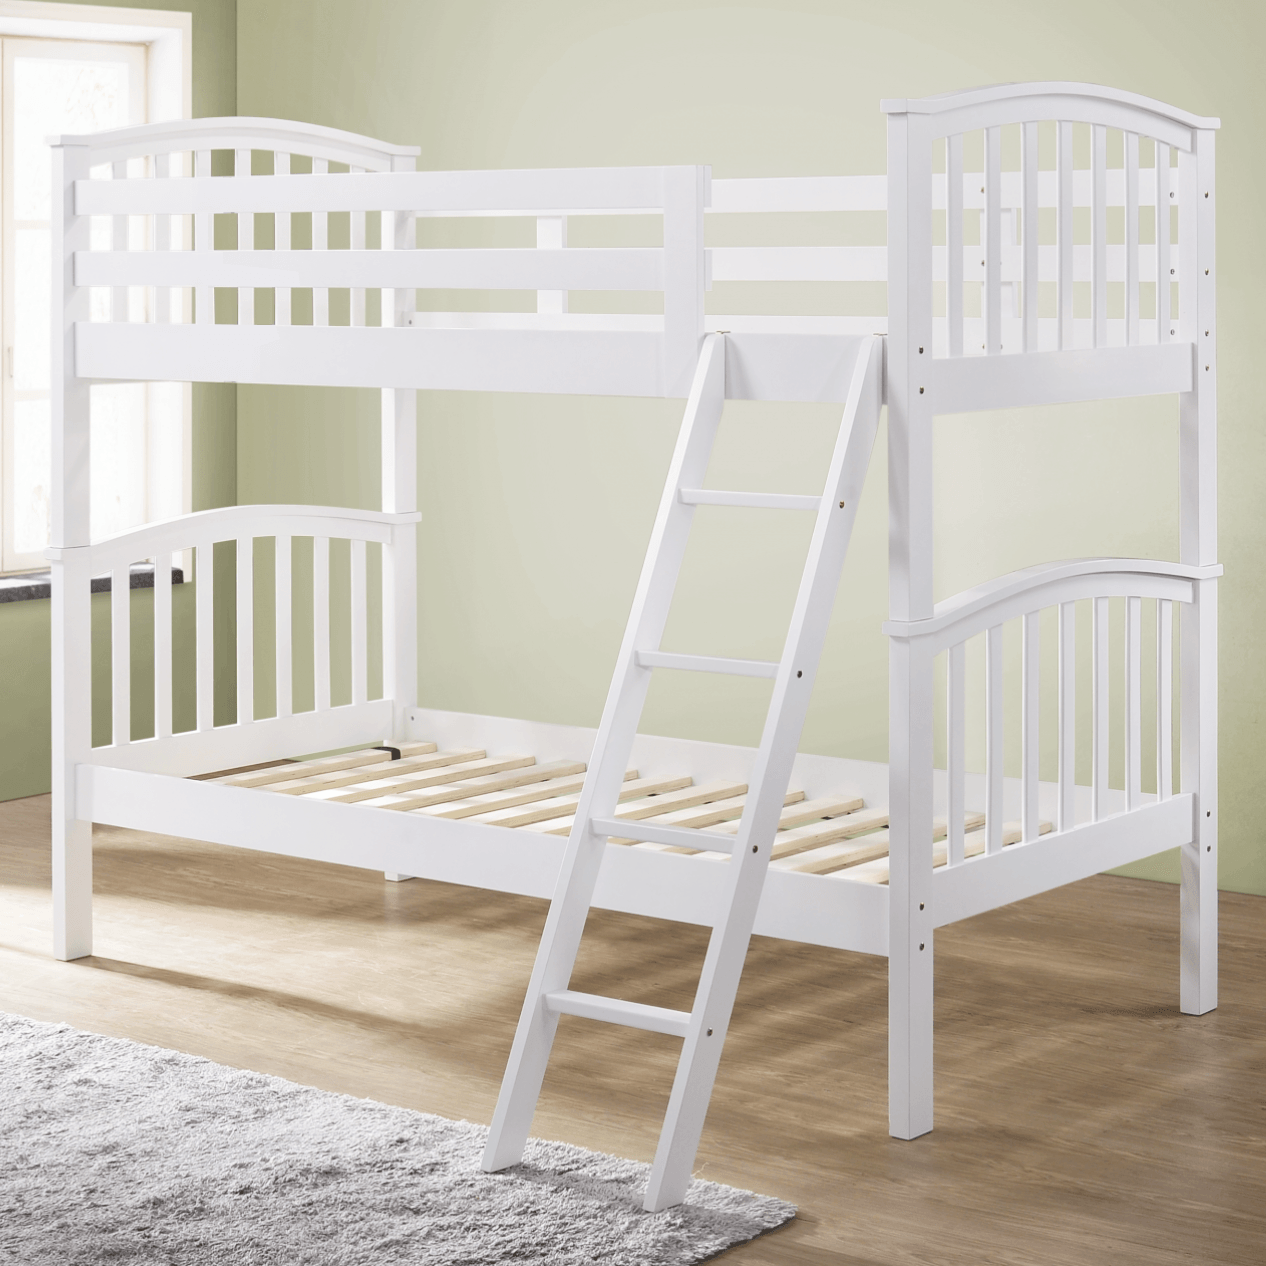 White Wooden Curved Bunk Bed Frame 5